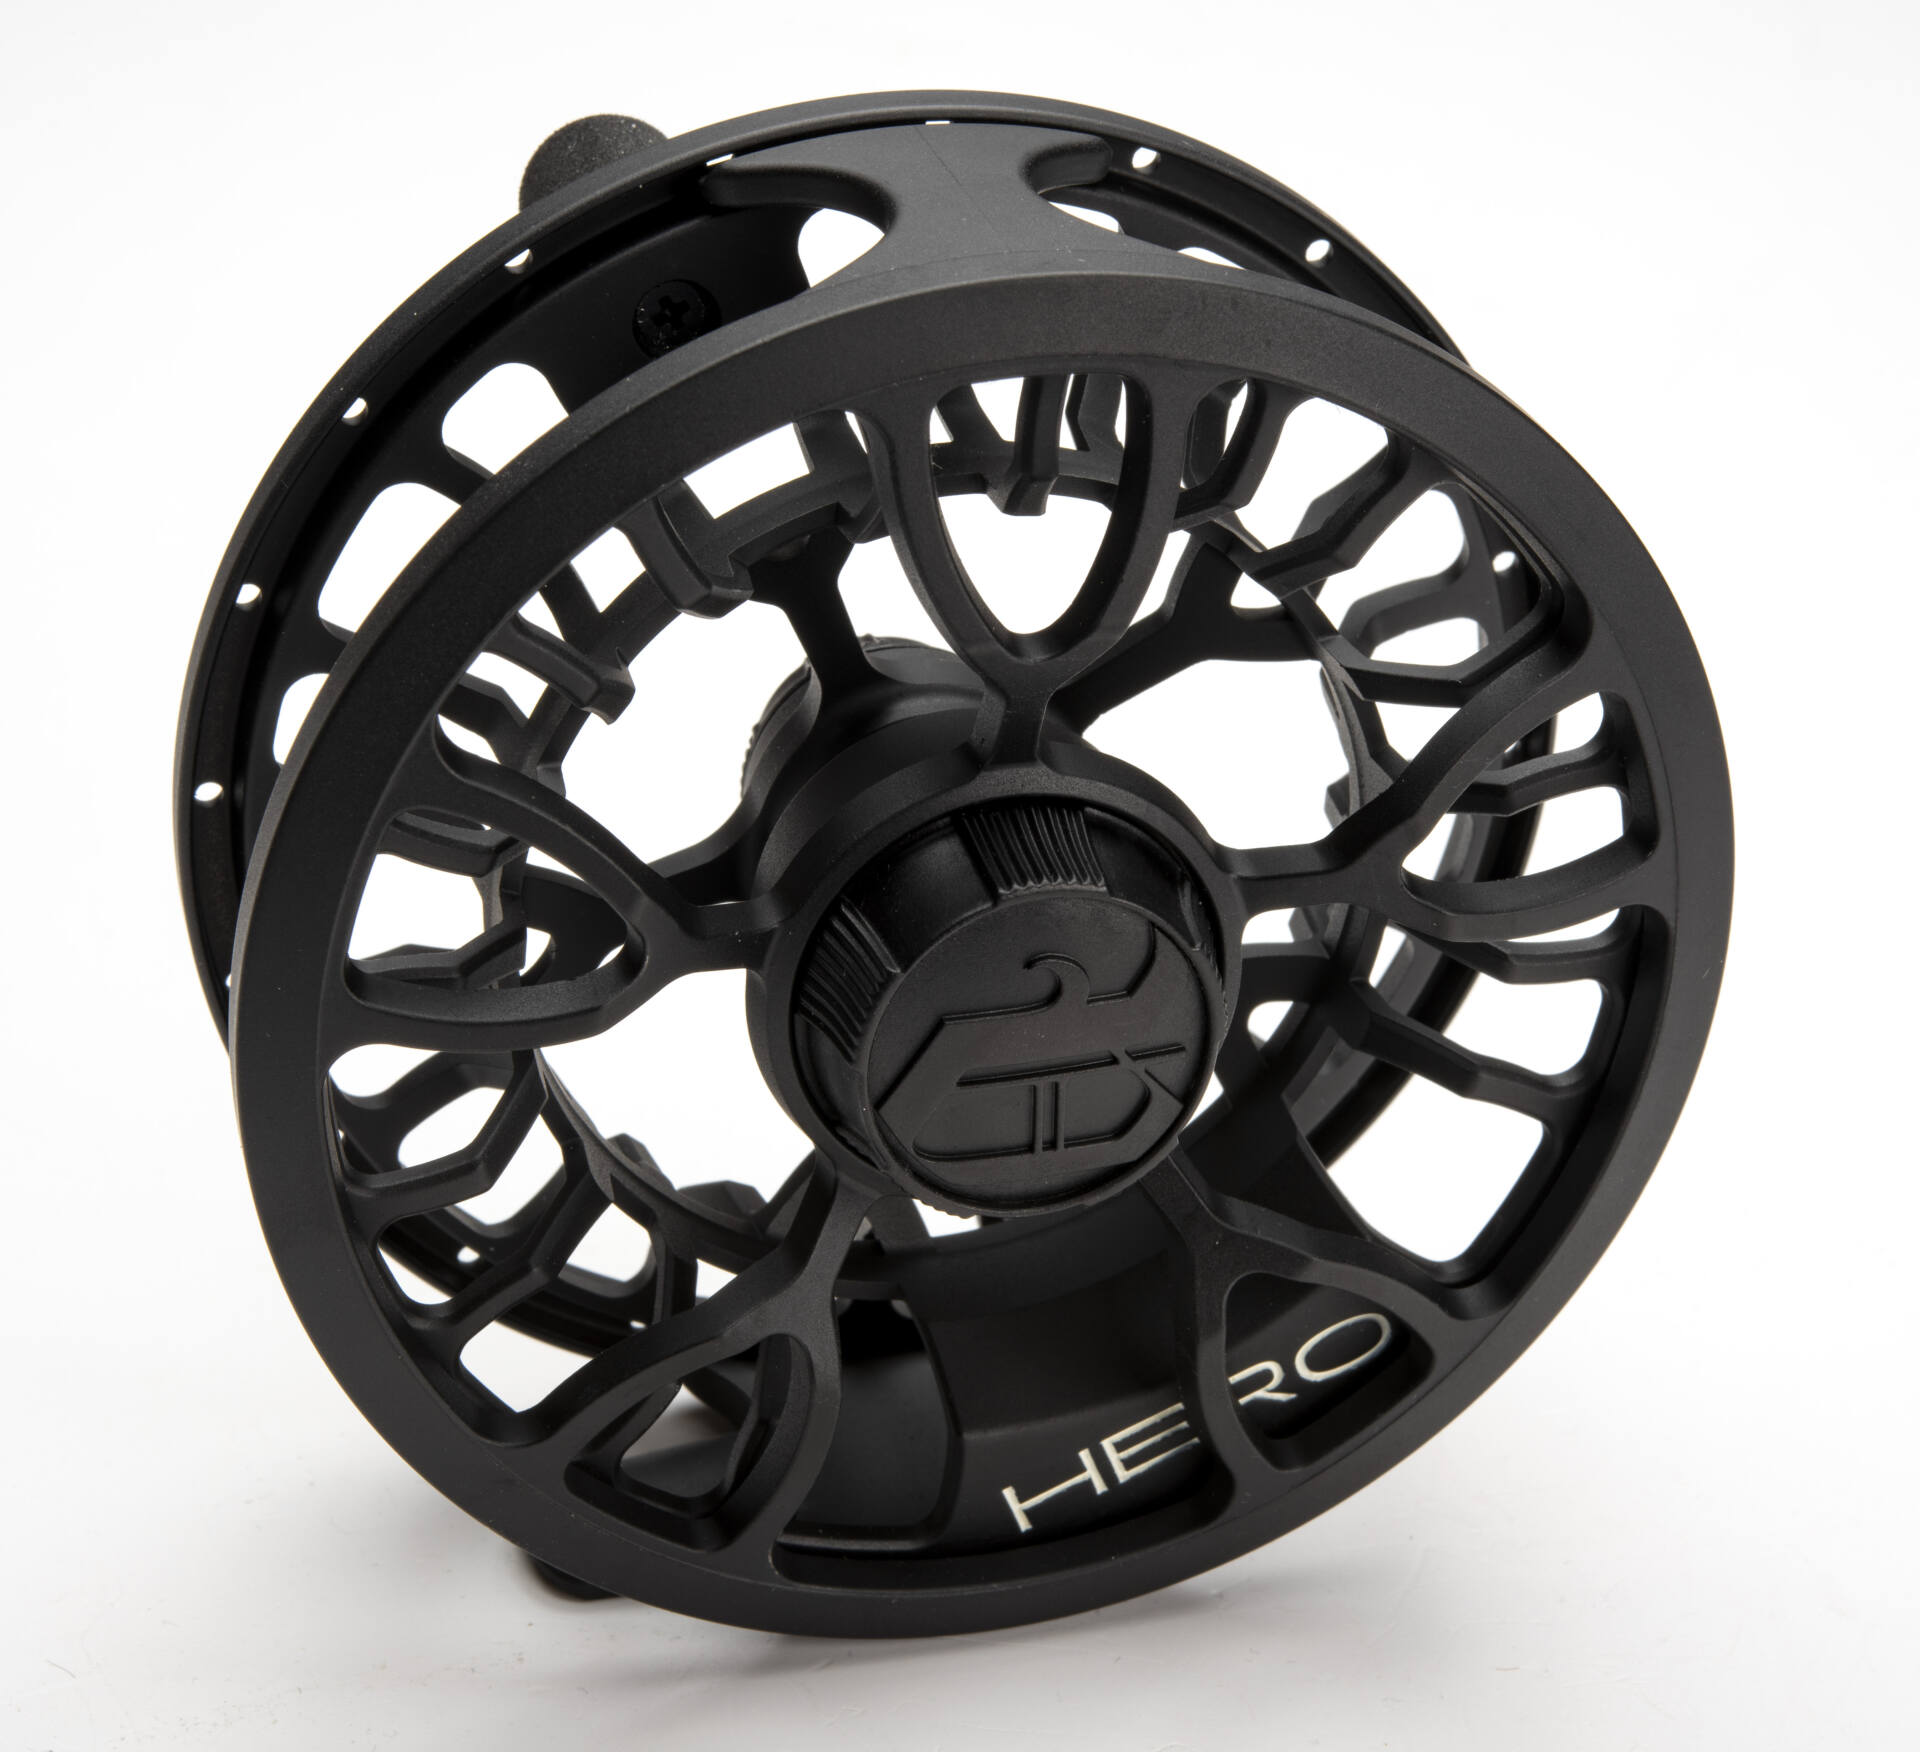 Vision Hero 79 fly reel - Fly Fishing and Fly Tying Magazine